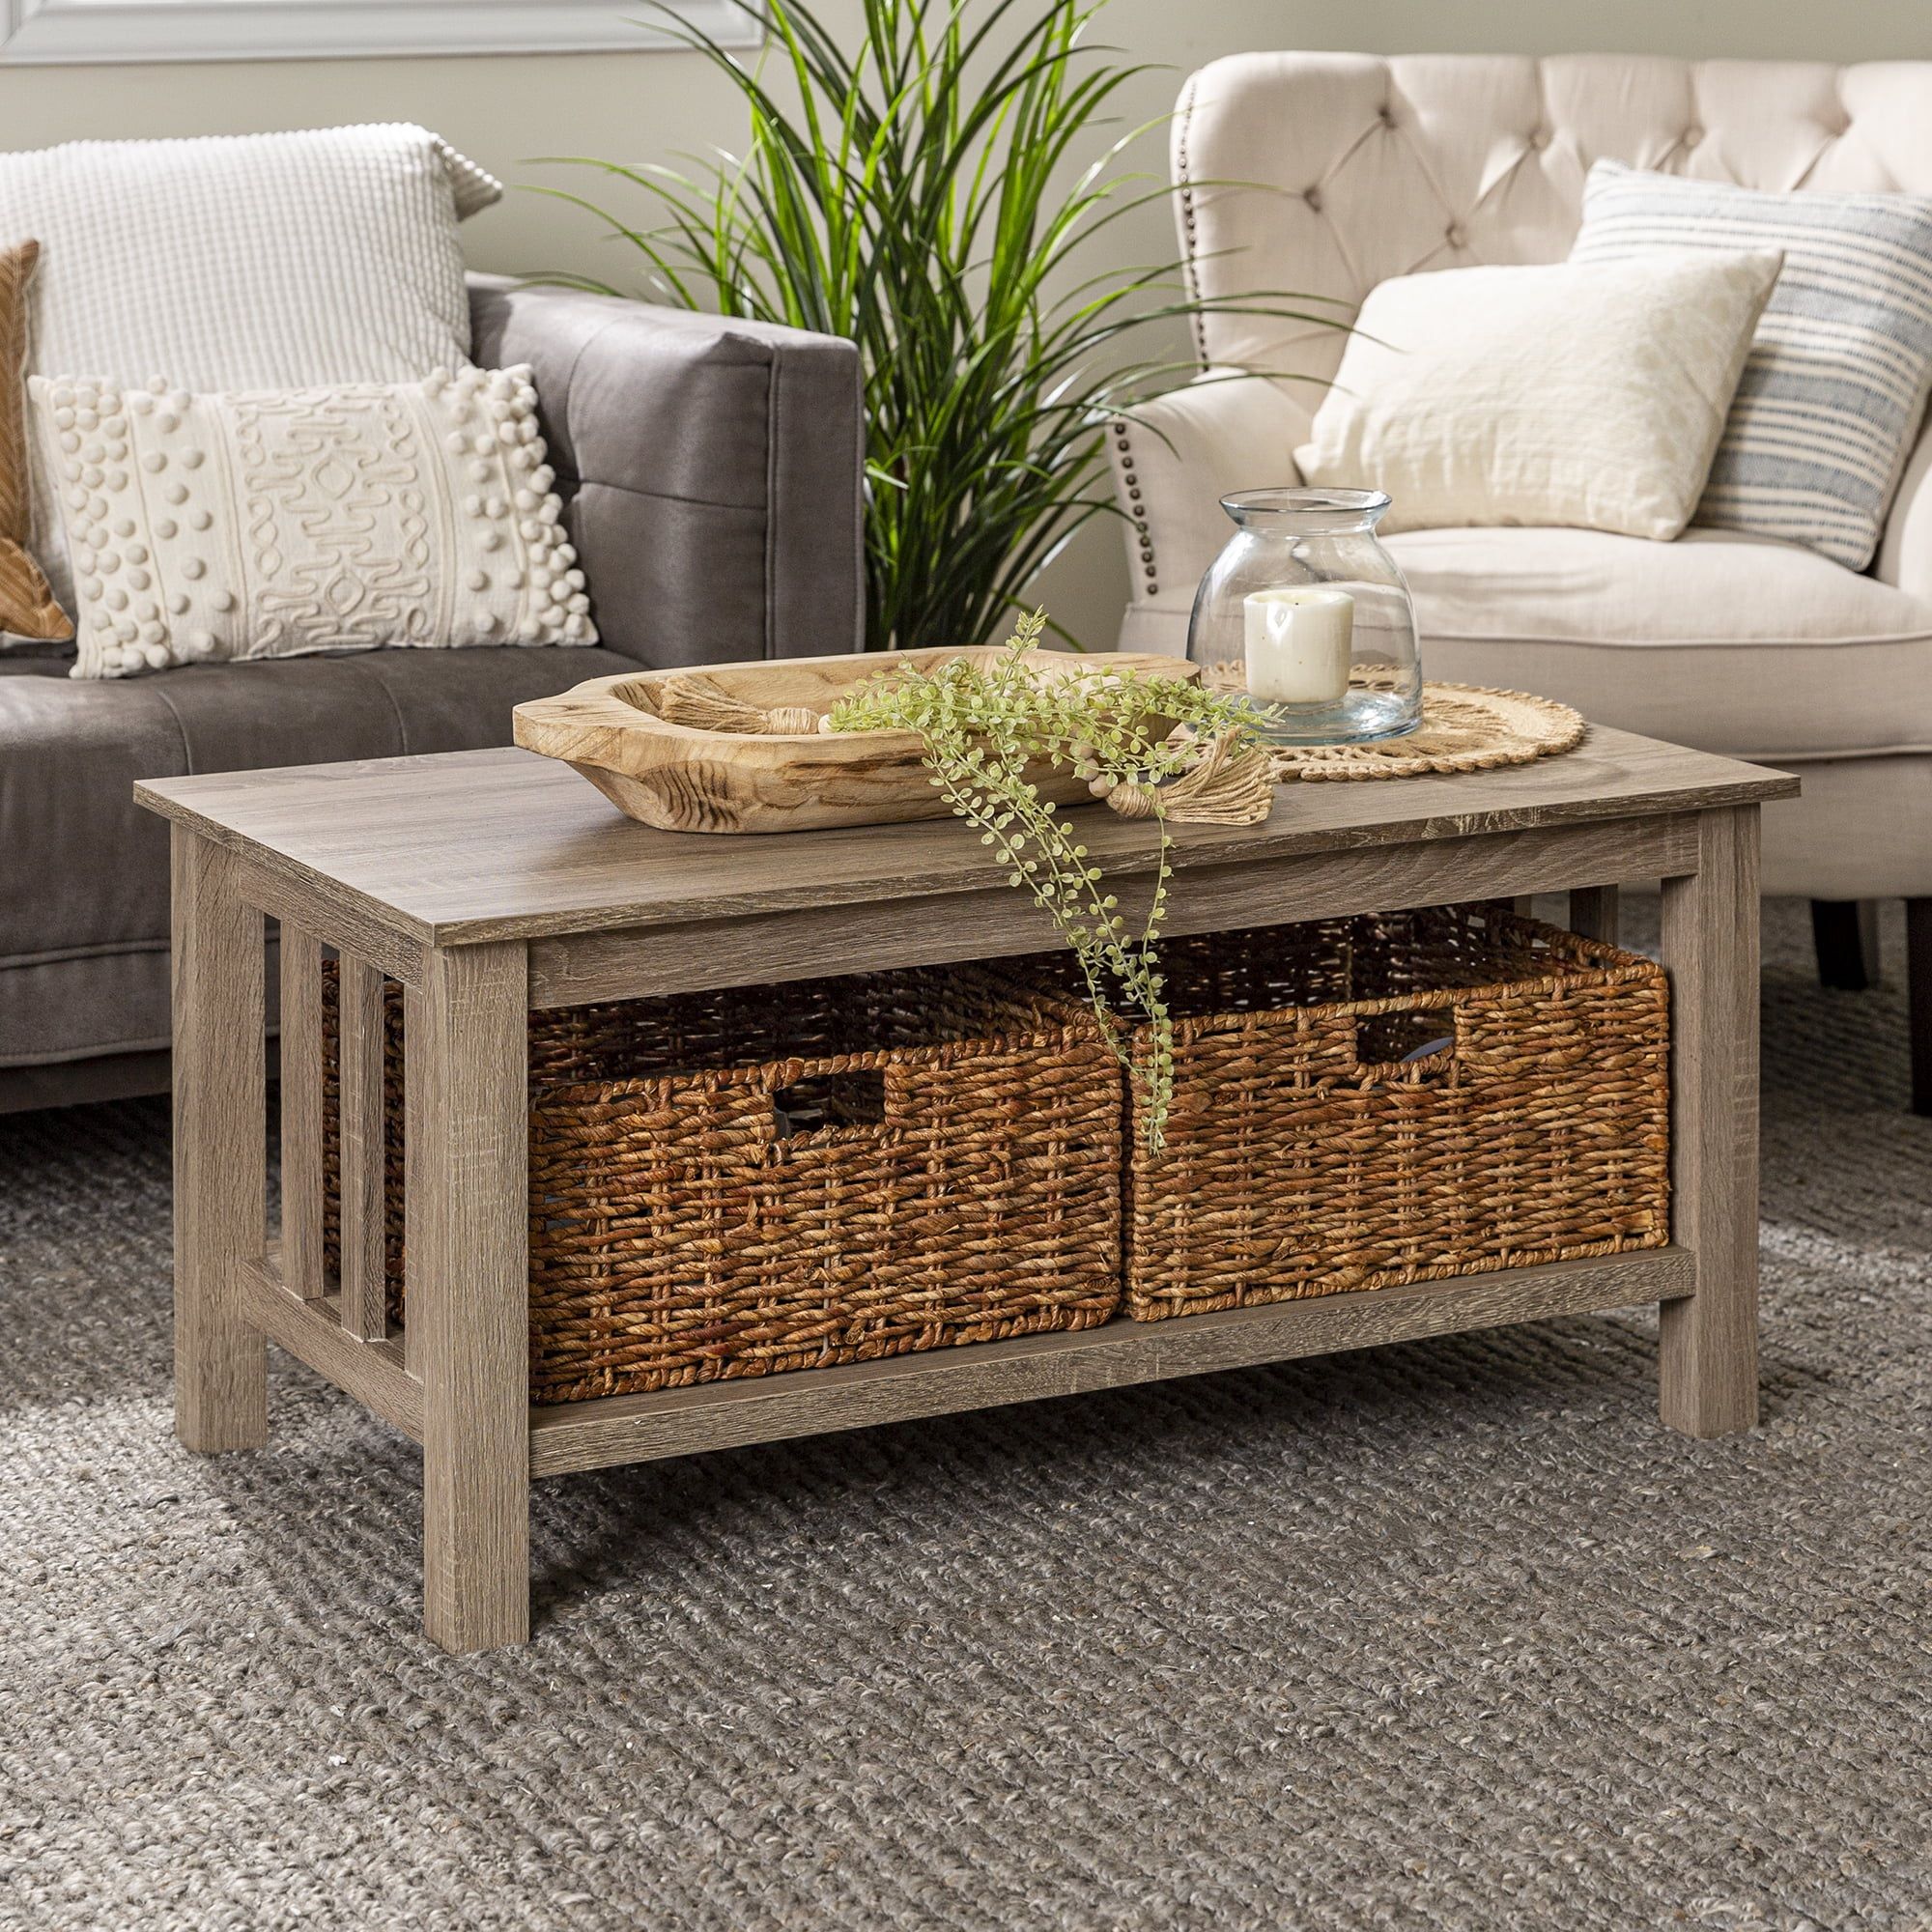 Woven Paths Traditional Storage Coffee Table W/ Bins $110 At Walmart Inside Woven Paths Coffee Tables (View 13 of 15)